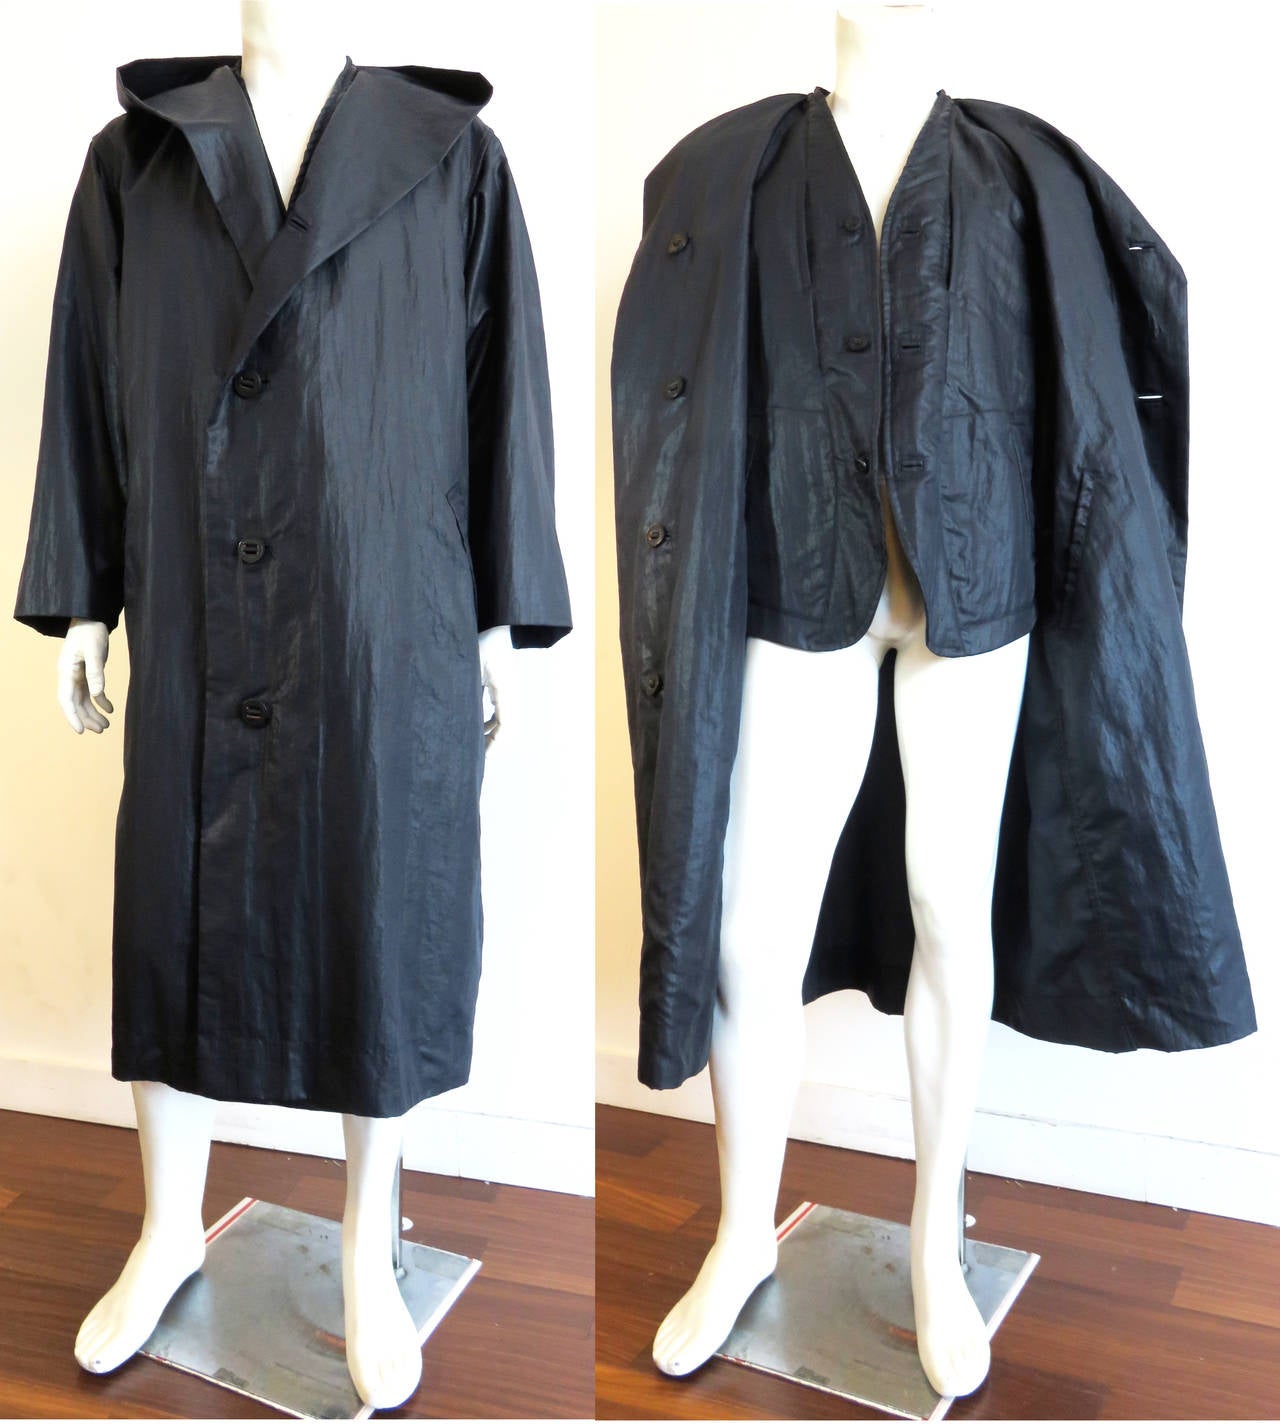 1988 ISSEY MIYAKE MEN Oversized hooded 2pc. coat & vest / waistcoat In Excellent Condition For Sale In Newport Beach, CA